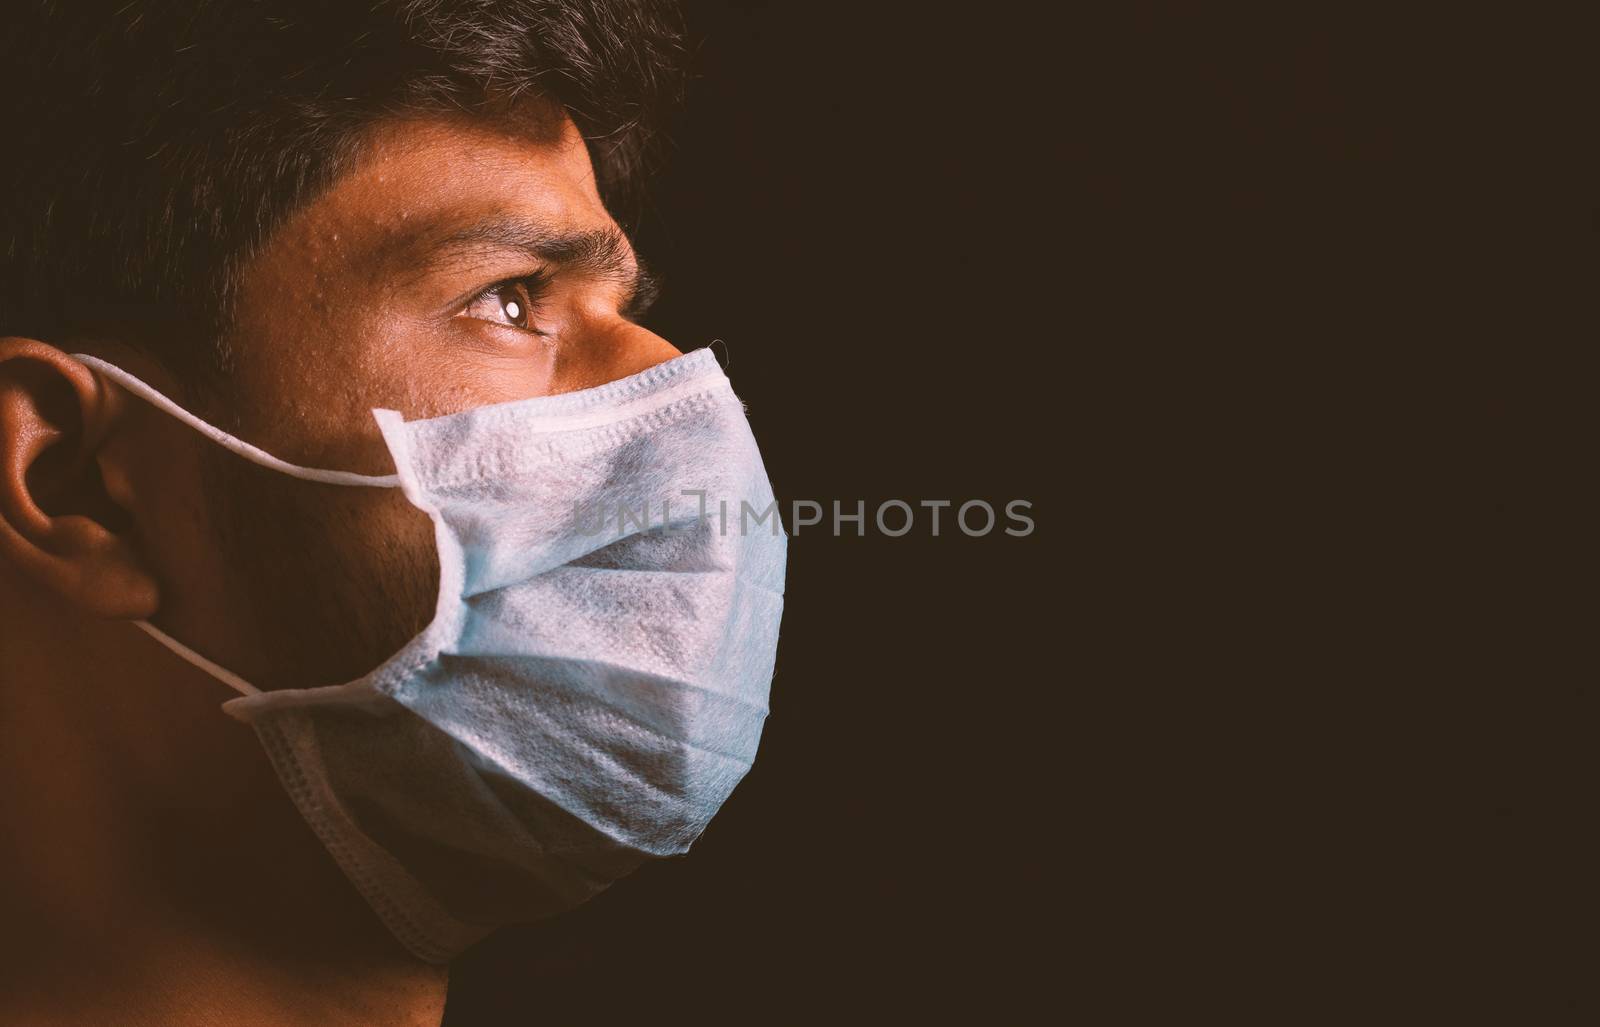 Young man wearing medical face mask to protect from spreading coronavirus outbreak infection in dark room and thinking of virus attack